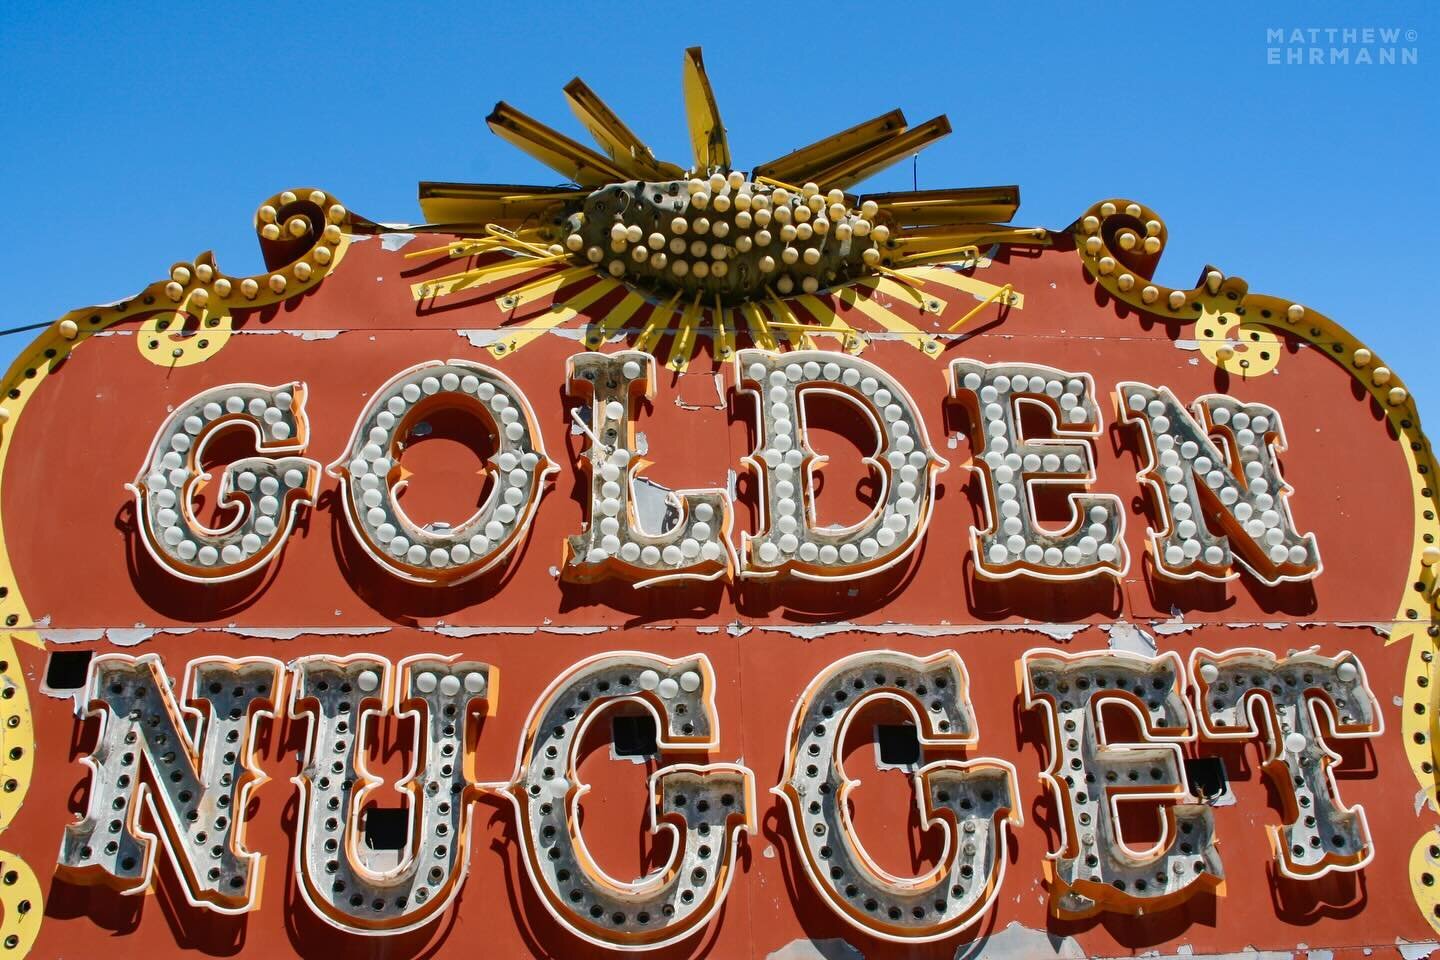 The Golden Nugget was built in 1946, making it one of Las Vegas&rsquo; older casinos. This sign was removed in 1984, when the casino underwent renovations. 
.
#photosfromtheroad
.
#signsunited #signgeeks #midcentury #abmlifeiscolorful #abmlifeiscolor